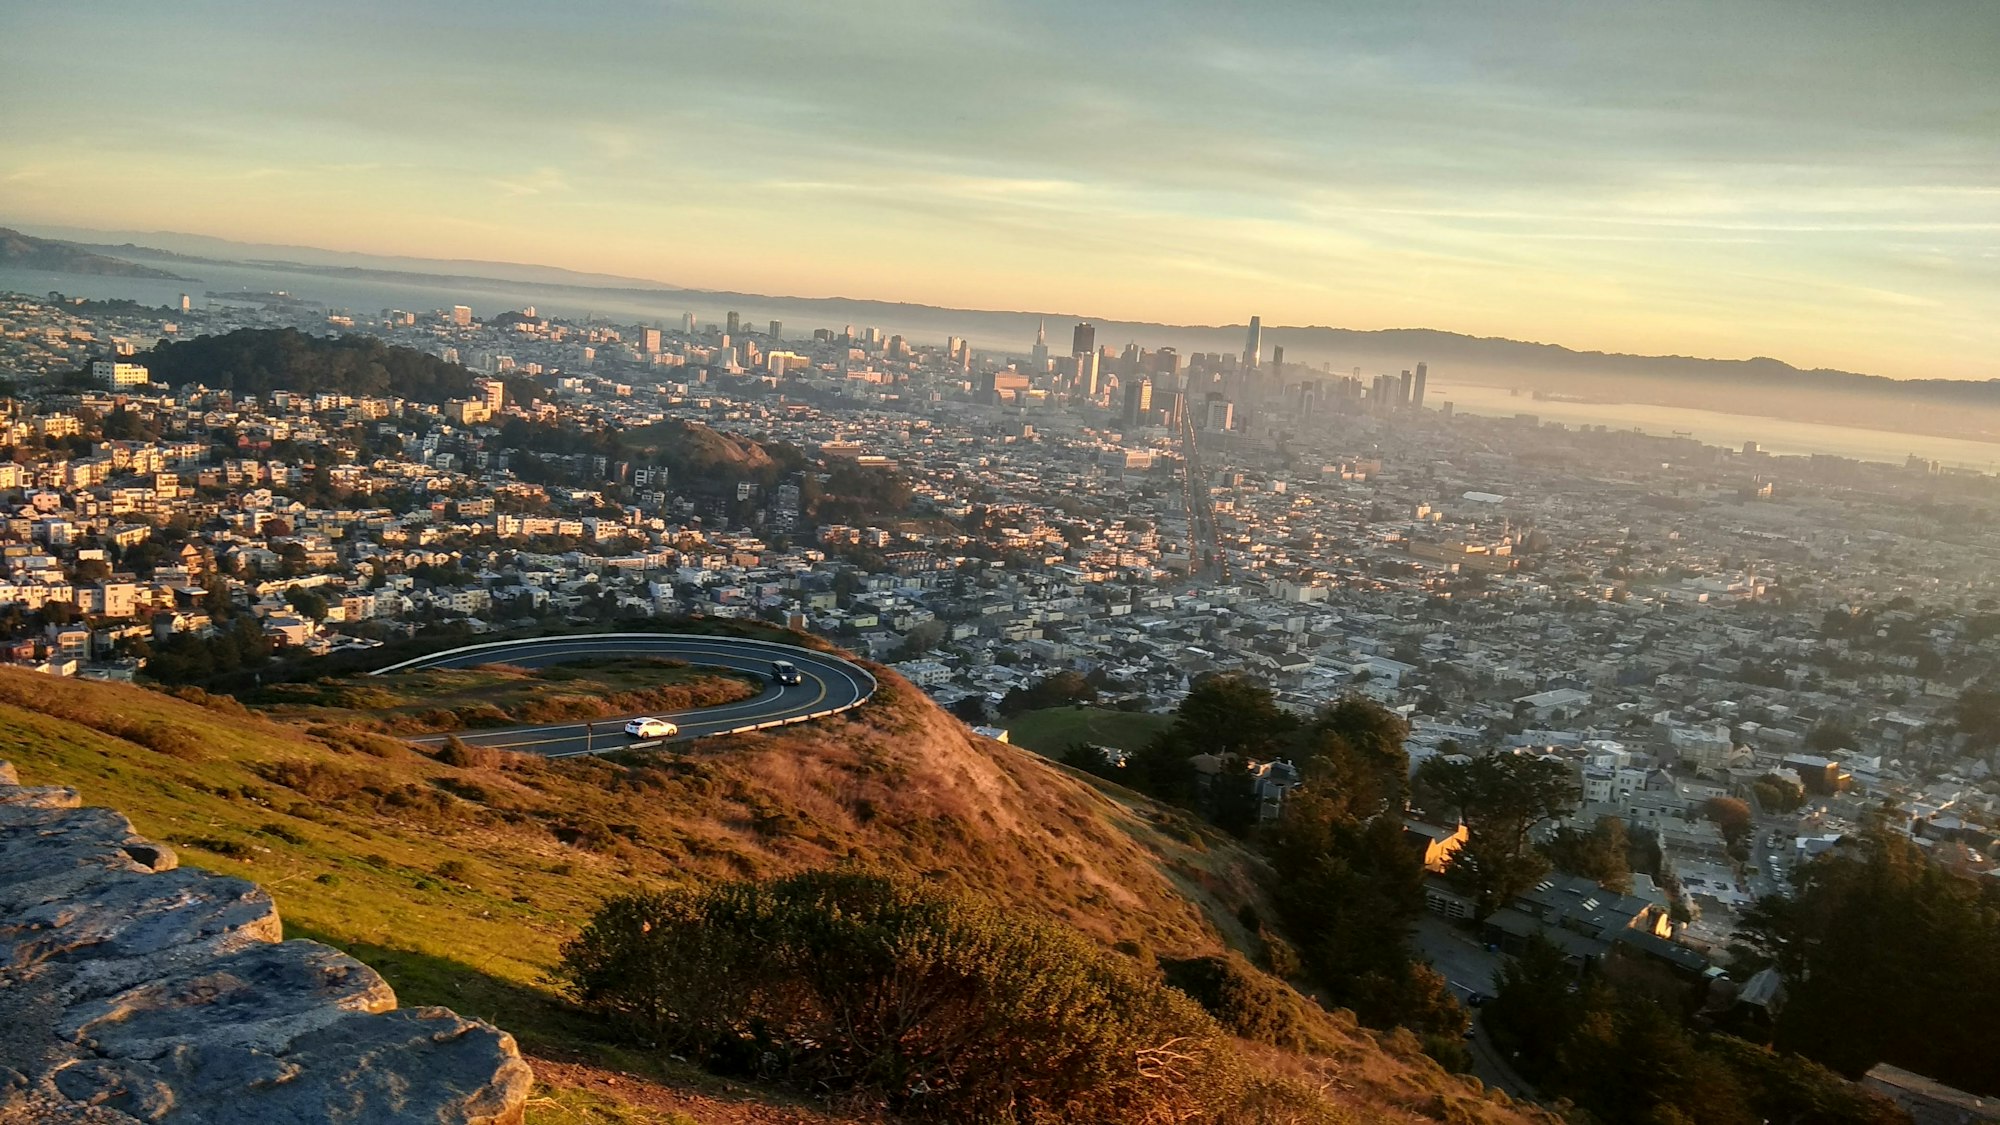 Was staying at an airbnb on twin peaks. I thought the view from my room was fantastic, but then I happened to walk to this place called Christmas Tree point and was just mesmerised. Ended up trekking there again the next day and even record a full sunrise video  of the Silicon Valley. 

This perhaps is one of the most underrated places in SF.

I am not really a photographer and have relied on unsplash community for great photographs…I thought this might be my chance to give back and share this beauty with the larger community.